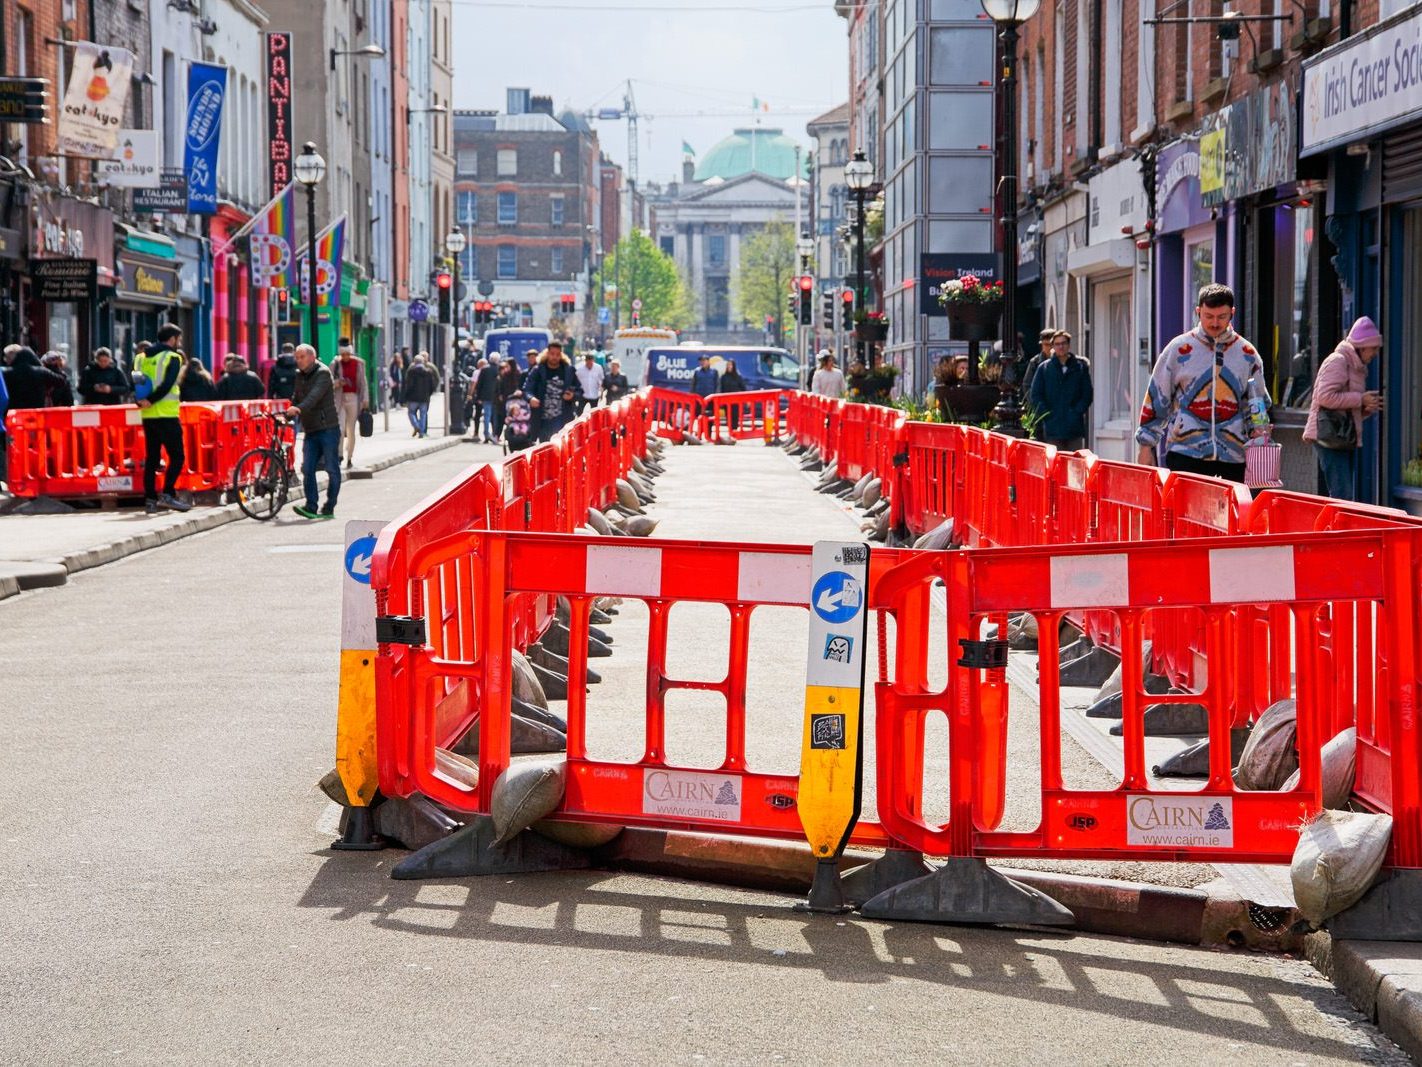 CAPEL STREET [THE RECONFIGURATION WORK HAS BEGUN AT THE LIFFEY END OF THE STREET]-223743-1